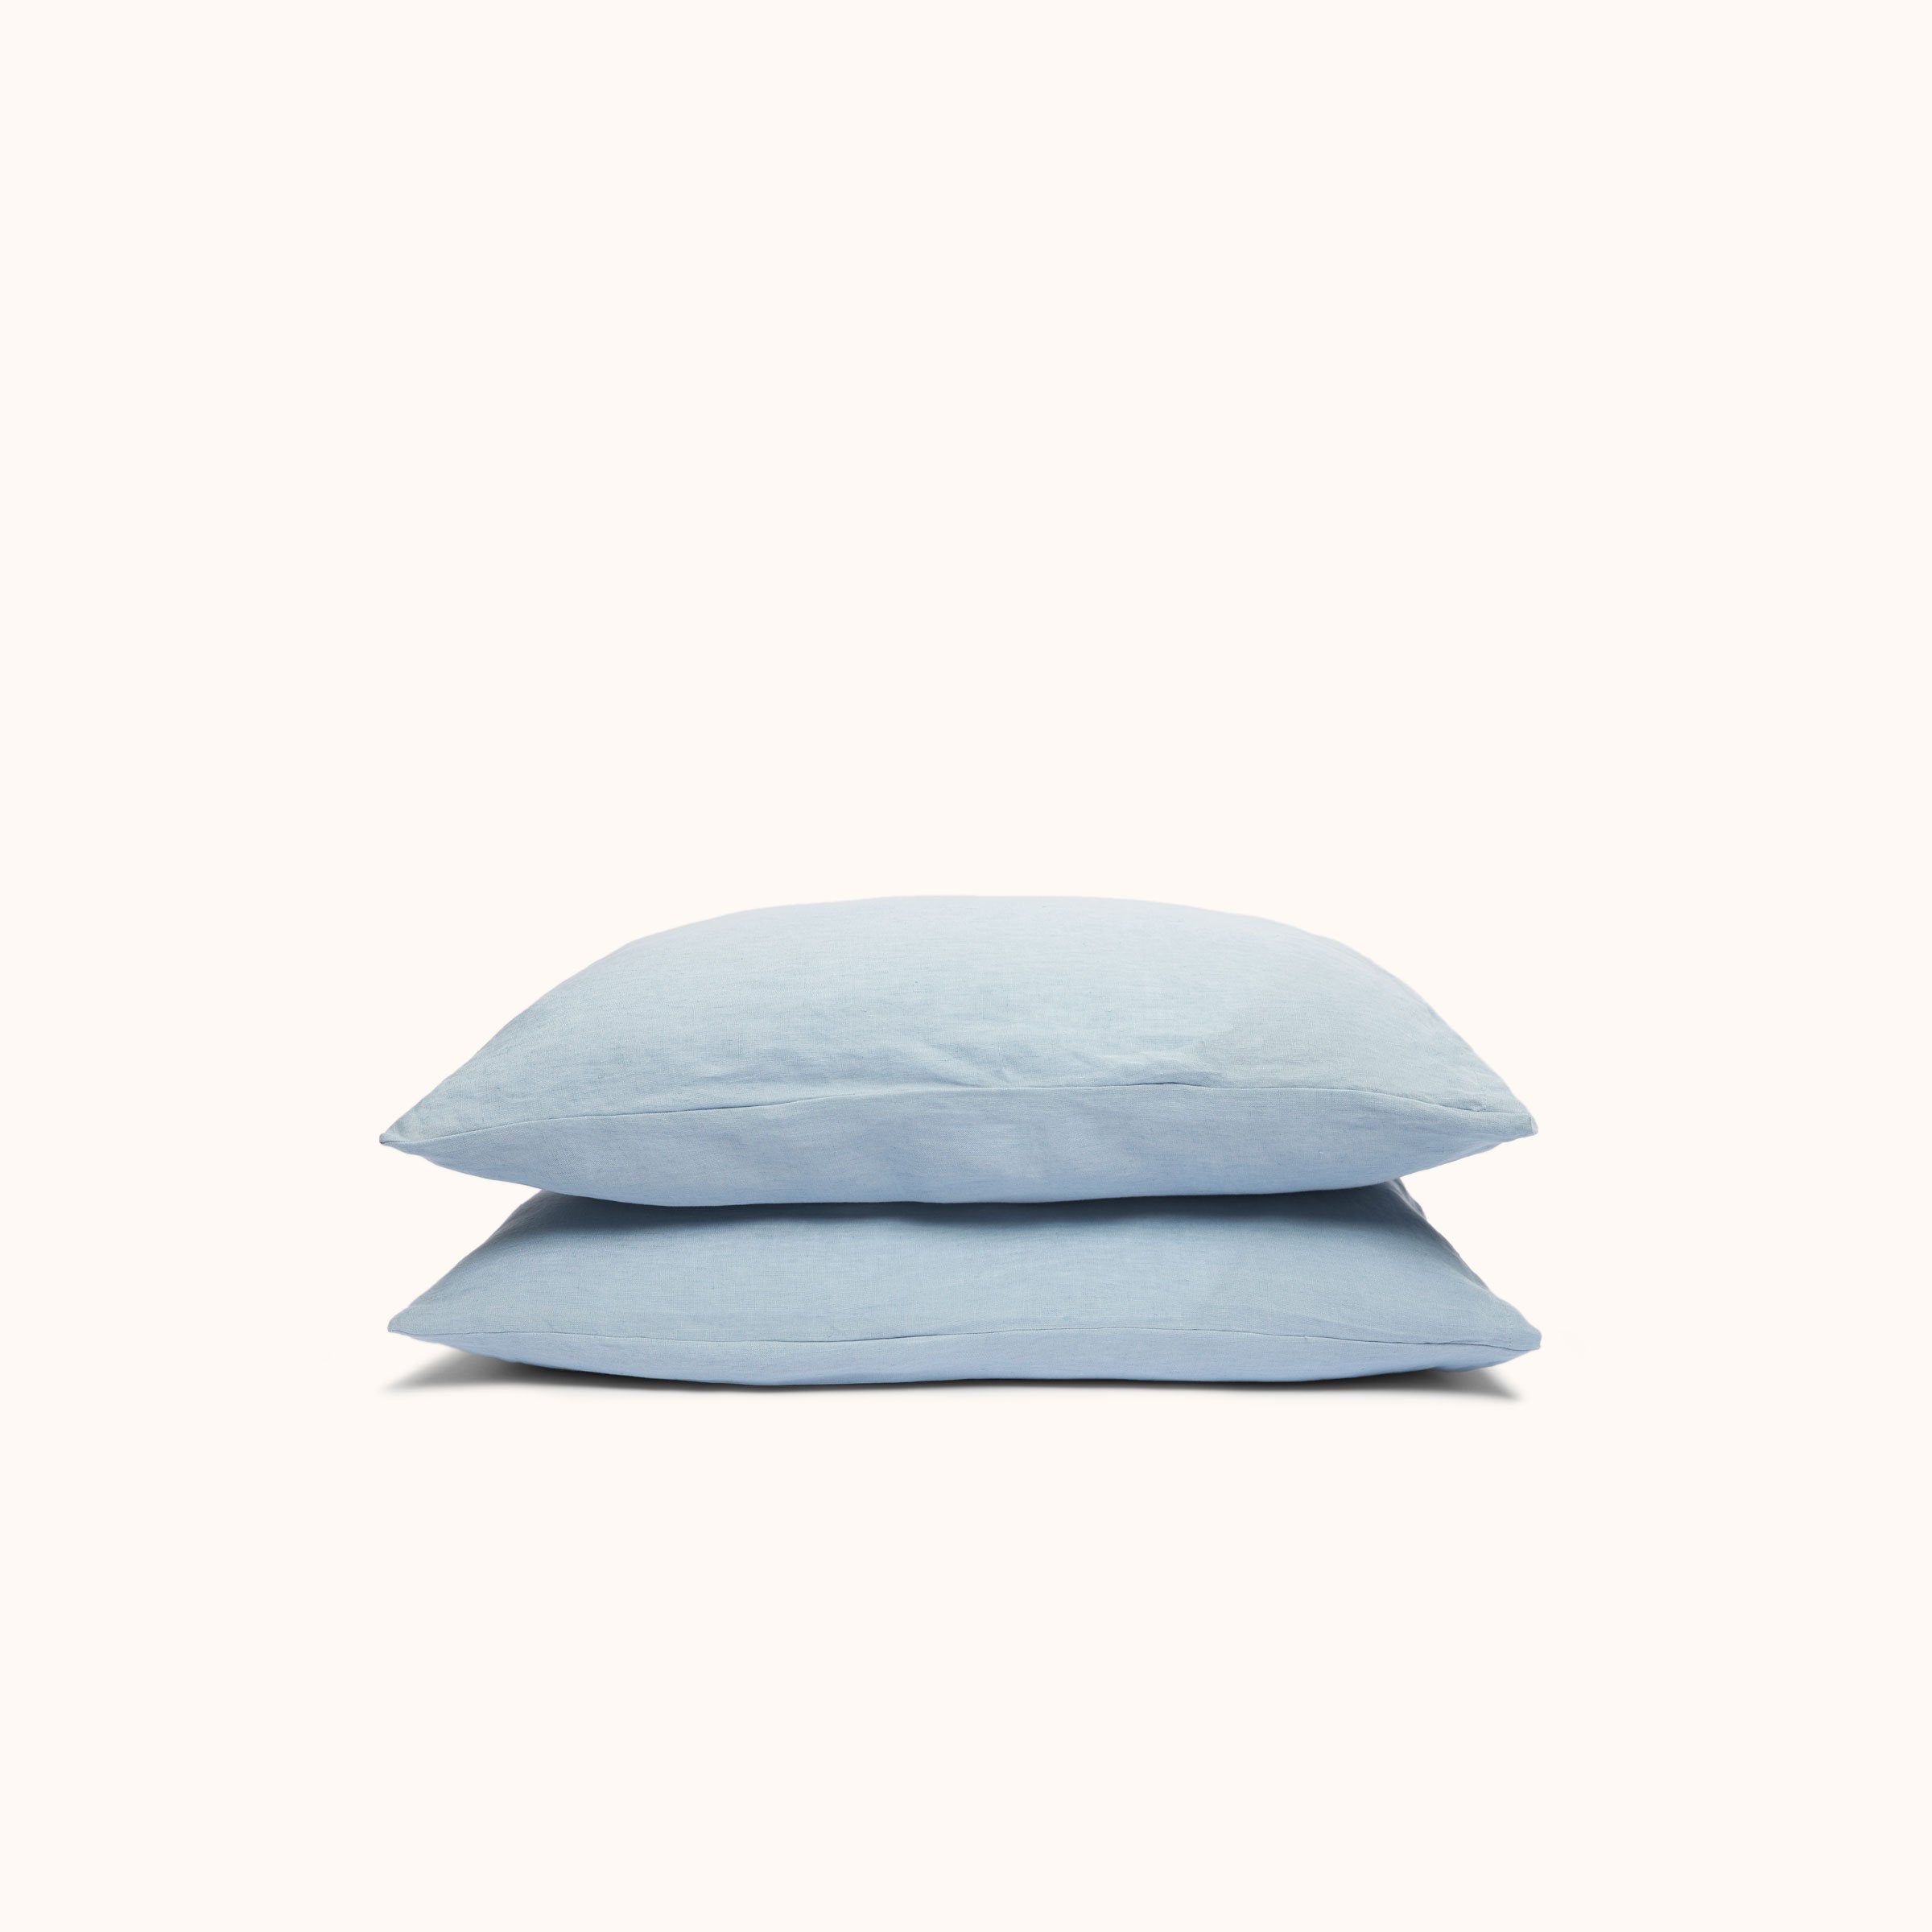 King Linen Pillowcase Set in White | Made in Portugal | Parachute